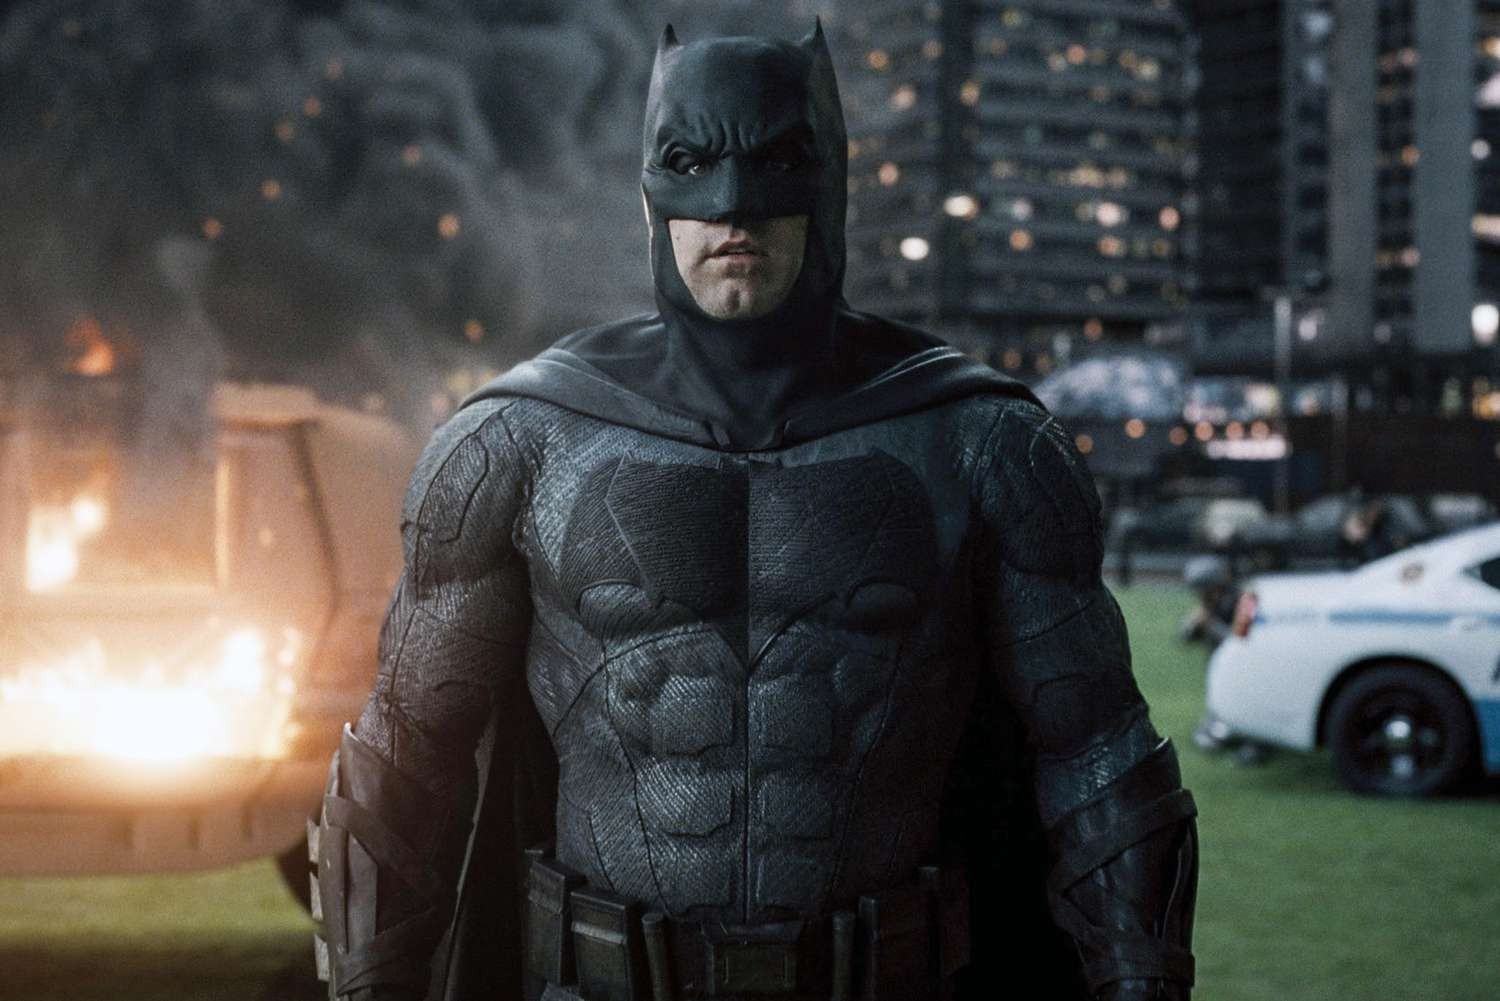 Justice League star Ben Affleck has lost the fun in playing protagonists in films